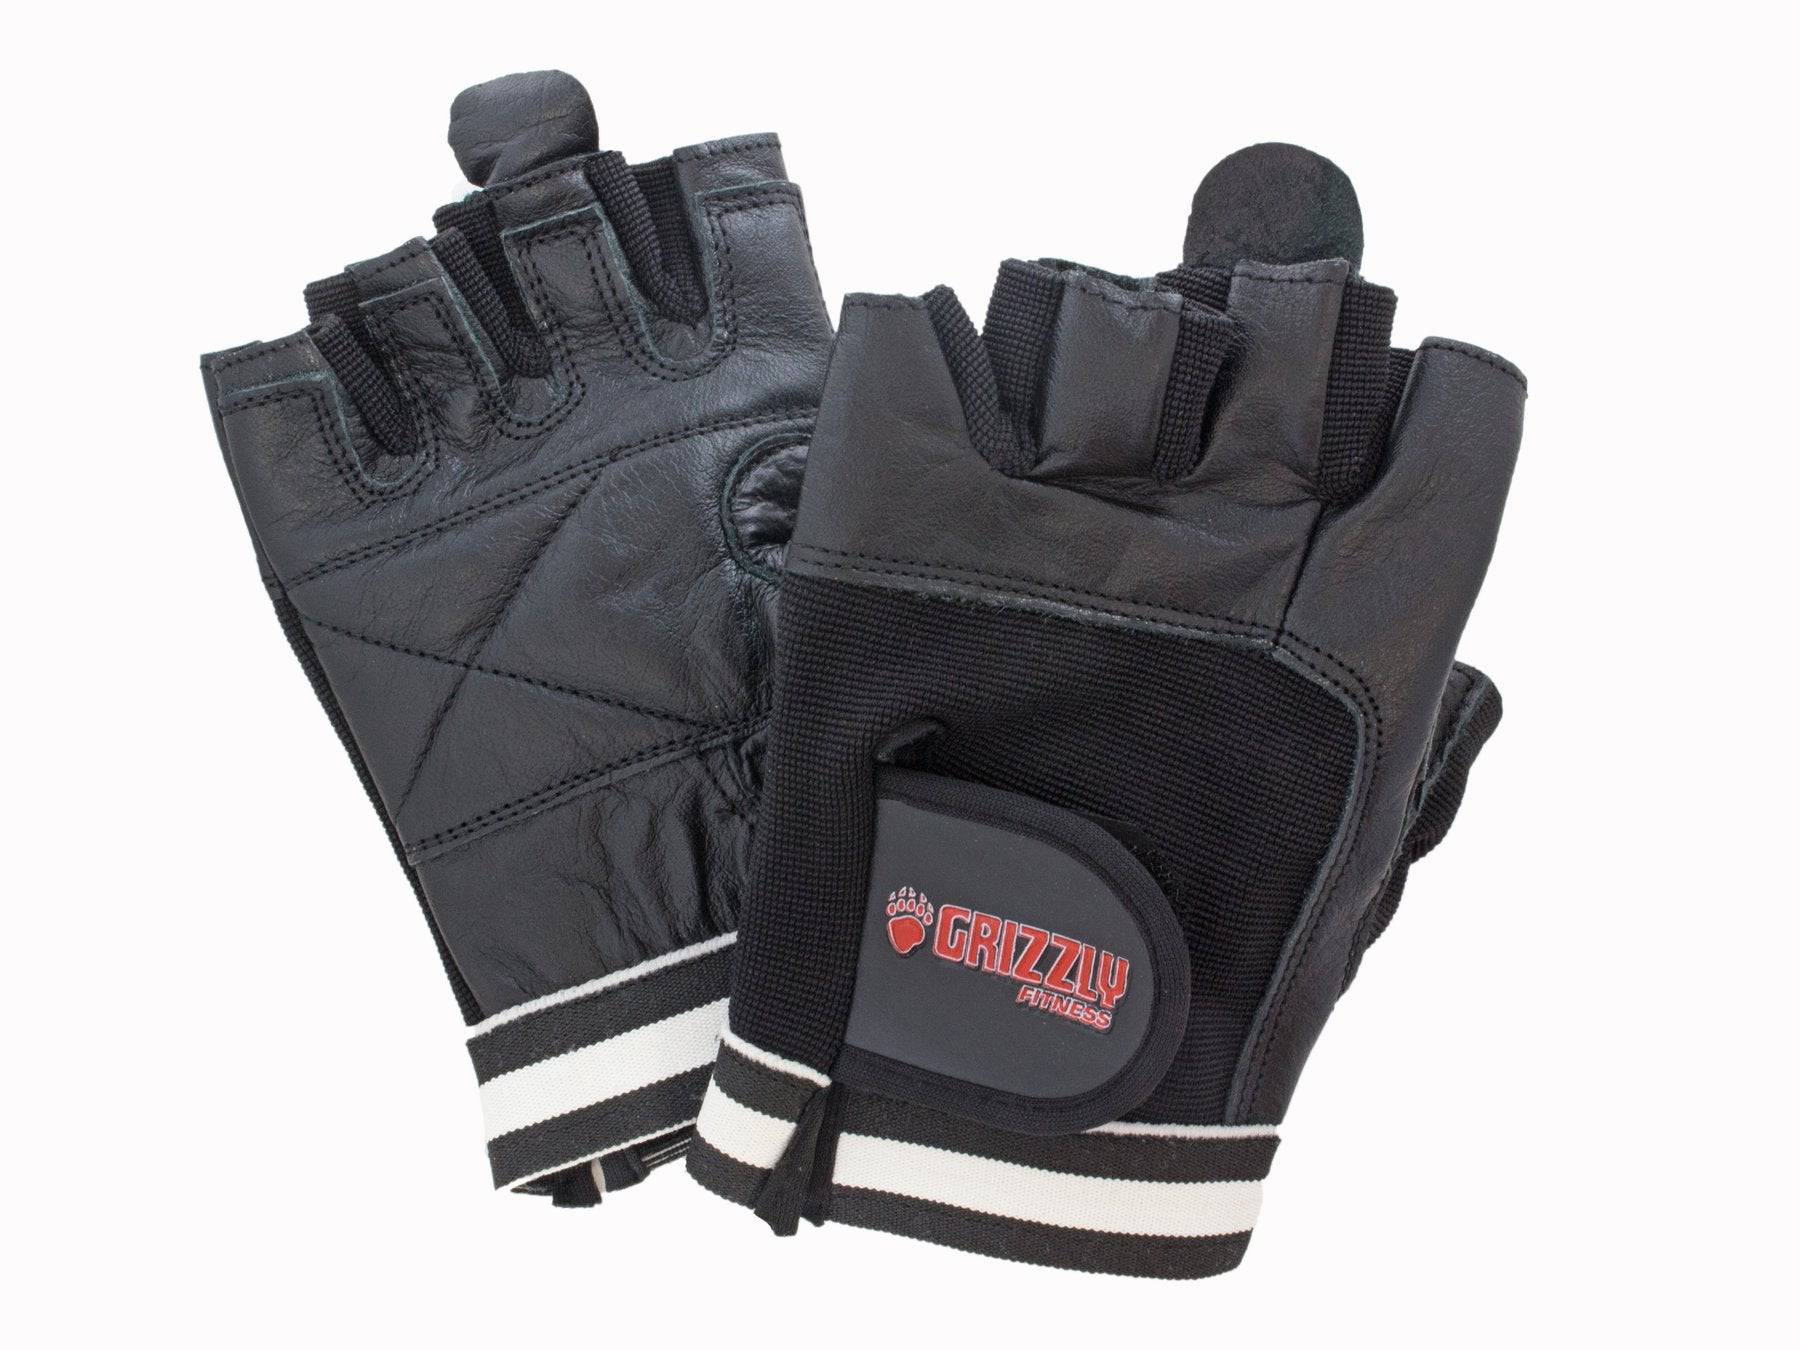 Grizzly Fitness | Grizzly Paws - Leather Training Gloves